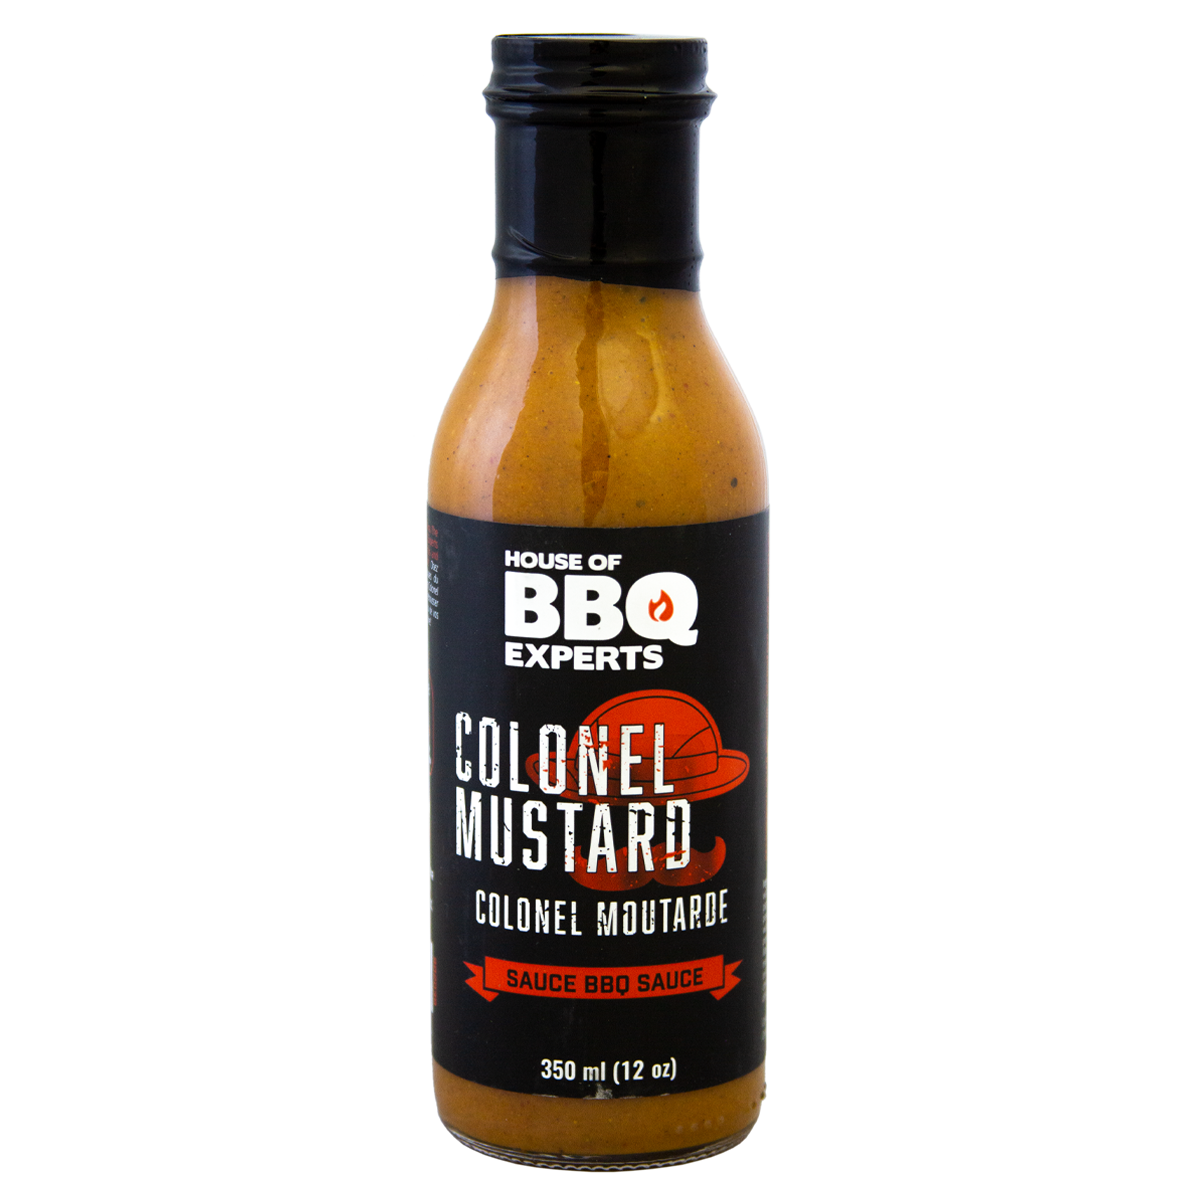 House of BBQ Experts Colonel Mustard Sauce 350ml (12.32oz)